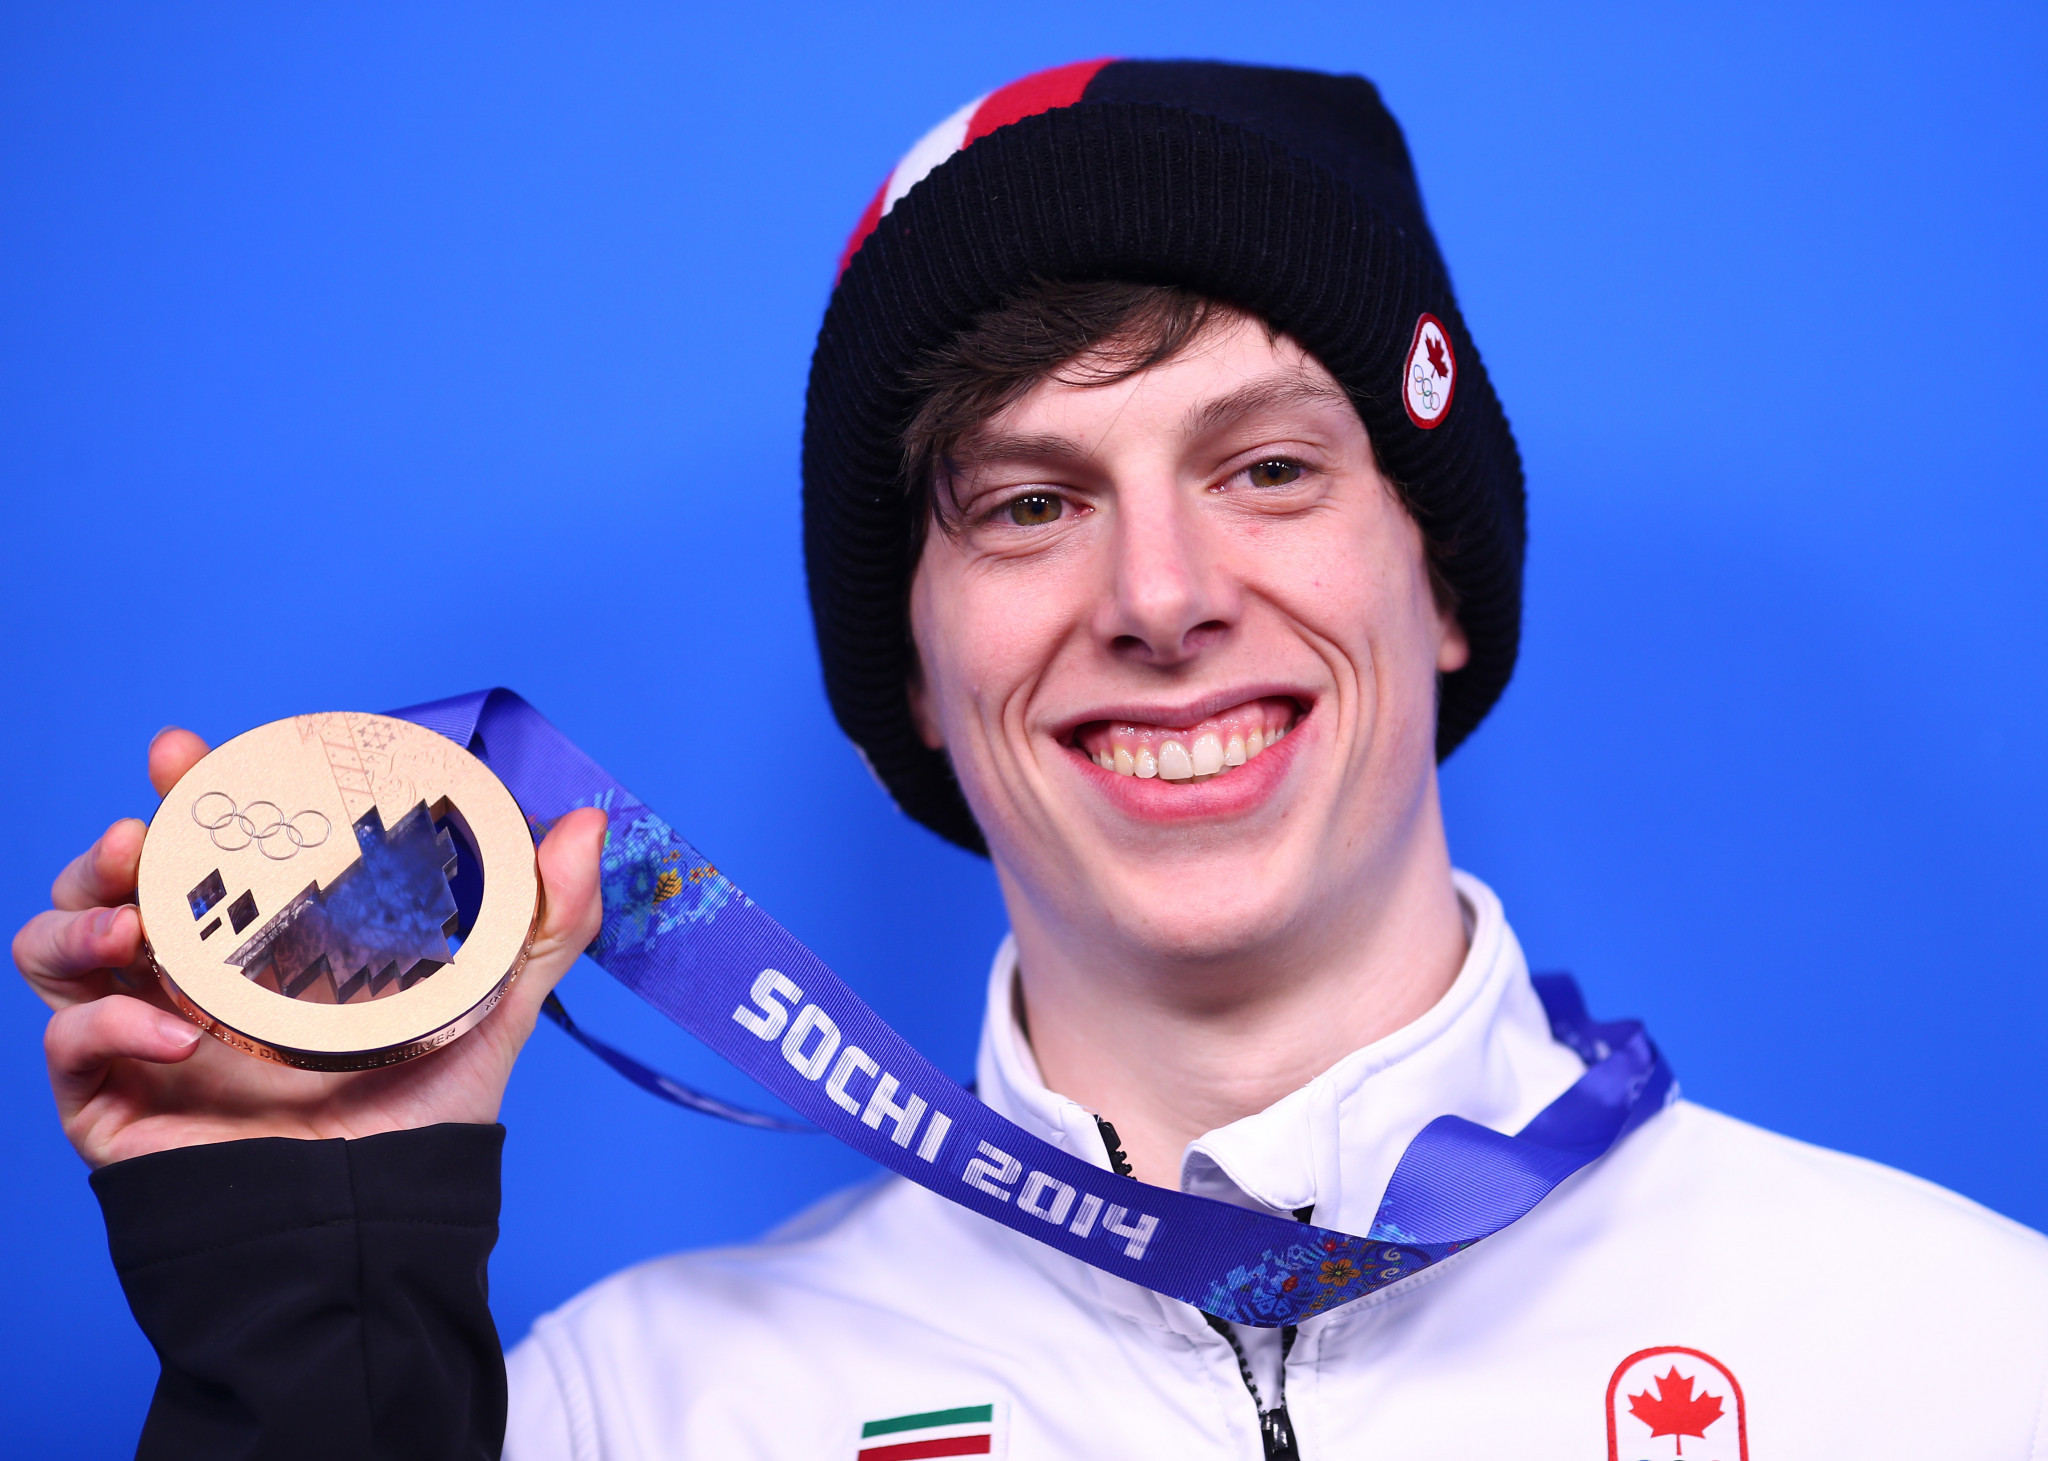 Charle Cournoyer won a surprise bronze medal over 500 metres at his first Winter Olympics in Sochi  ©Getty Images